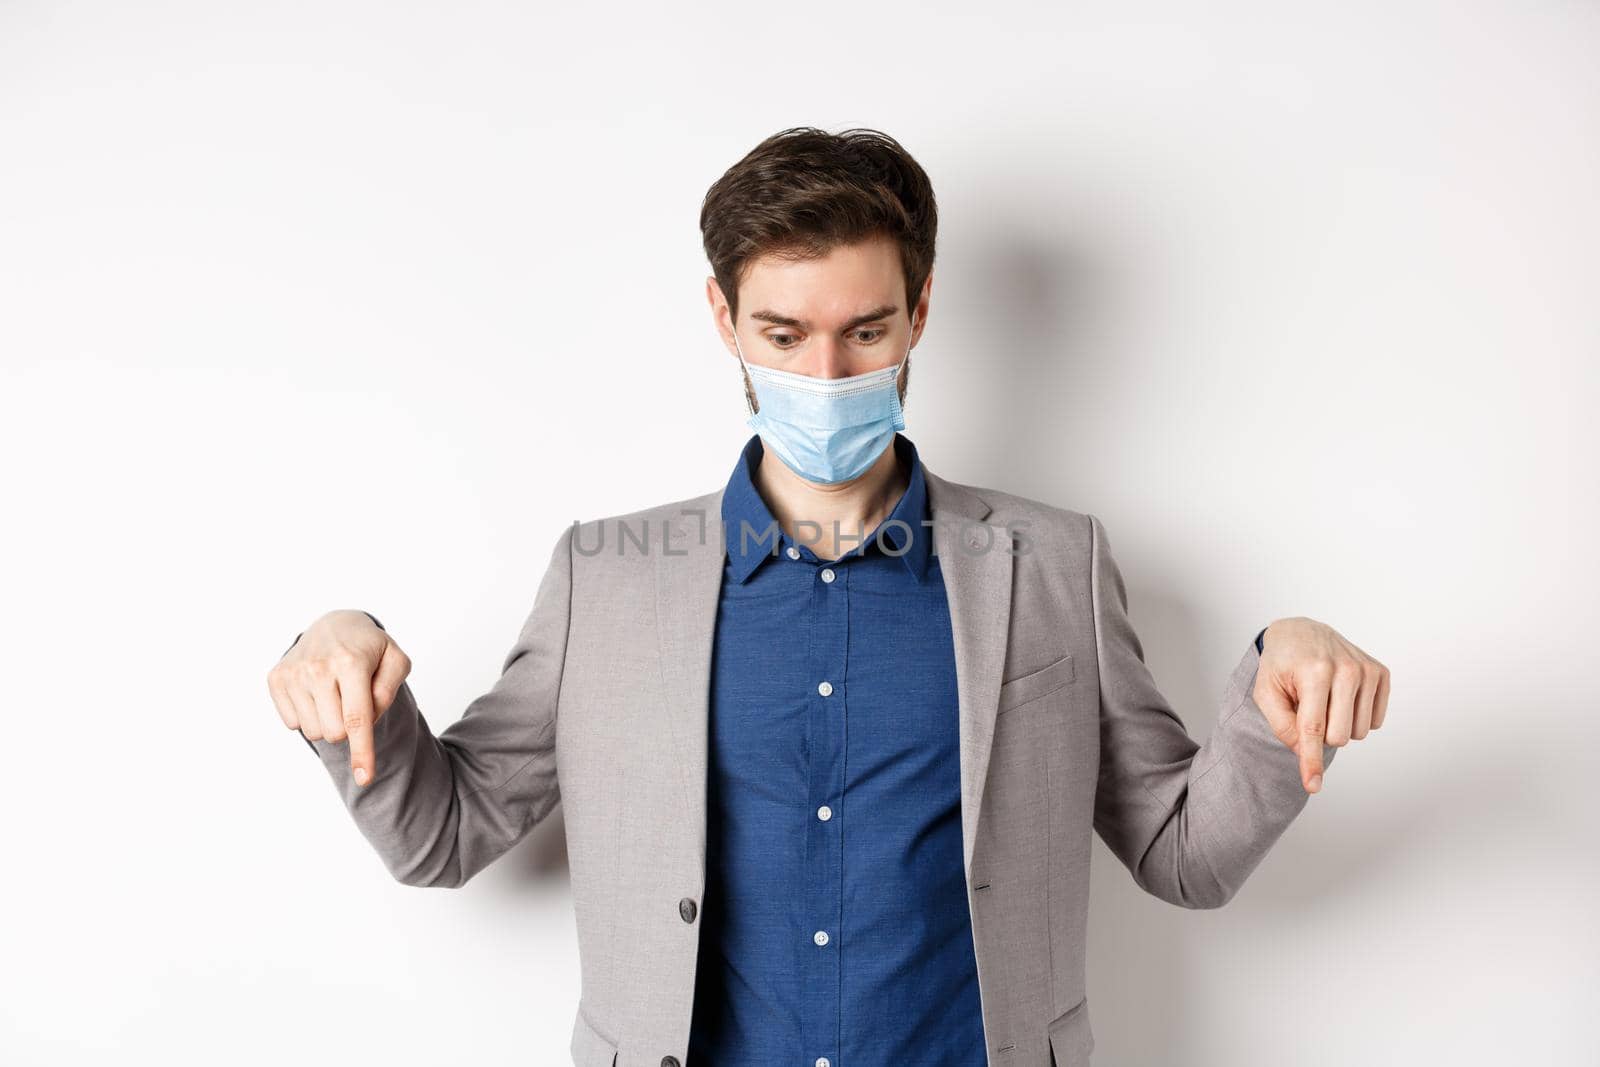 Covid-19, pandemic and business concept. Surprised guy in medical mask and suit looking and pointing down with popped eyes, gasping amazed, white background.